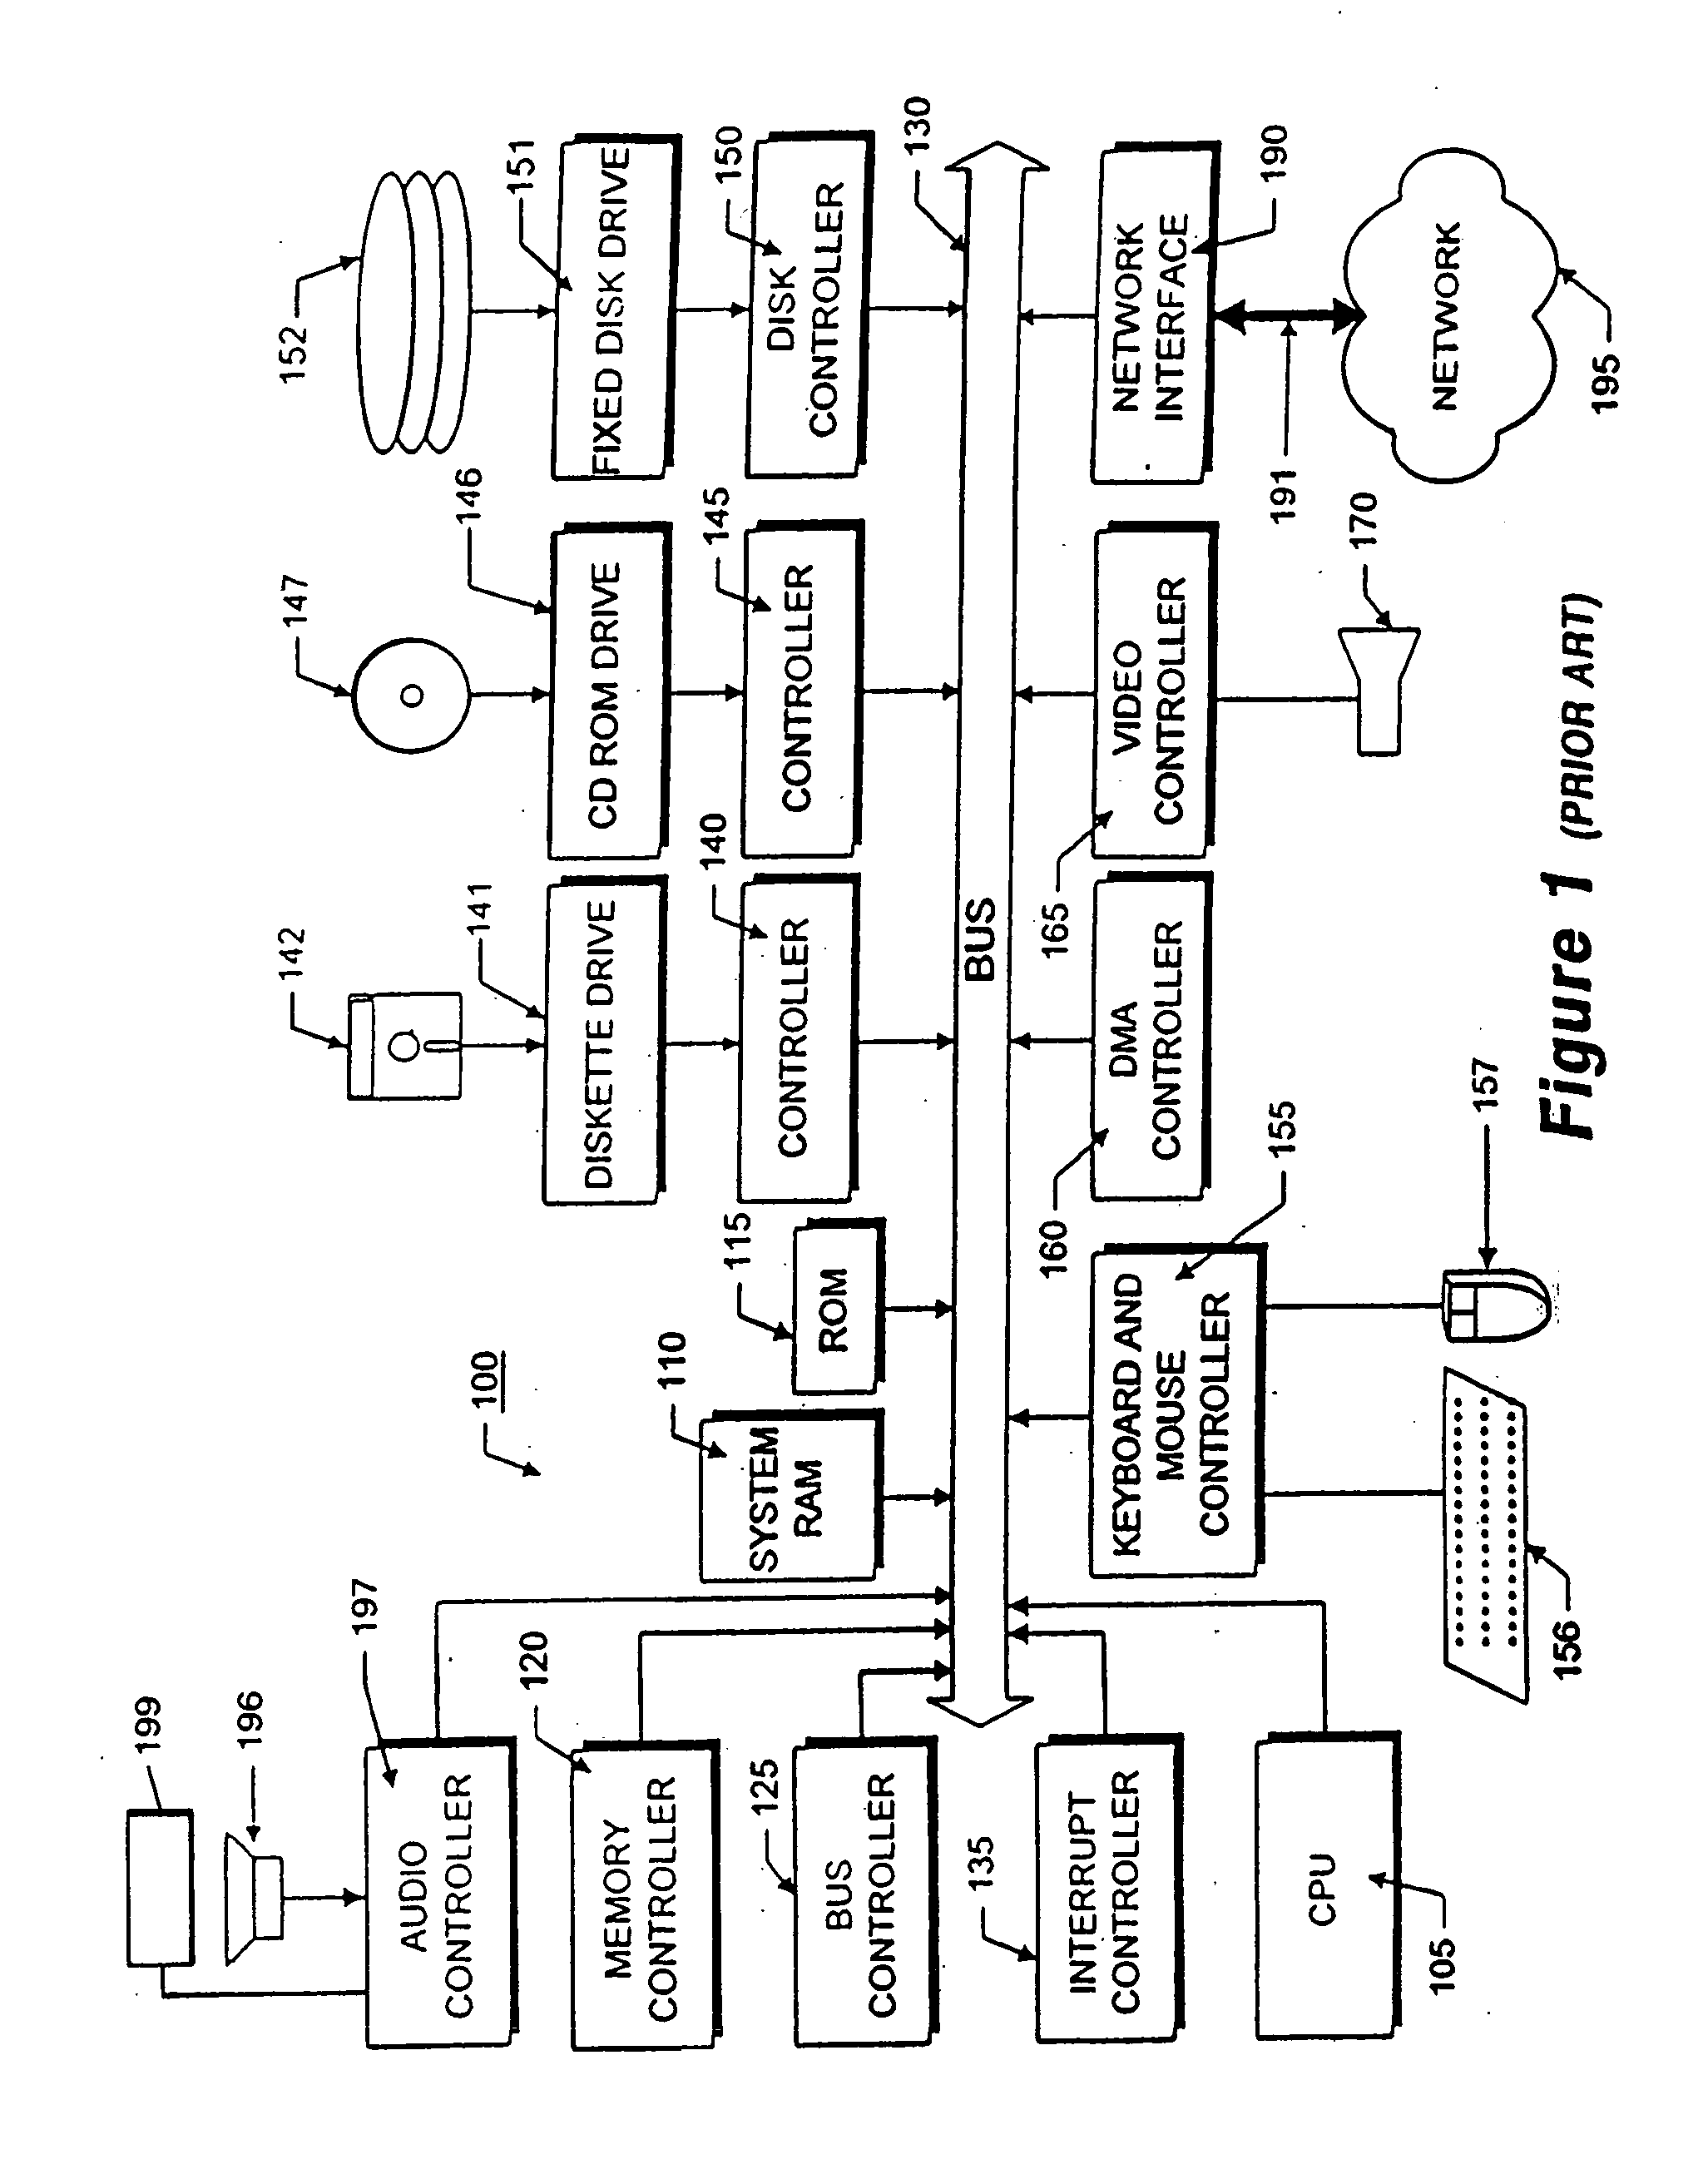 Method and apparatus for creating and conducting on-line charitable fund raising activities with competitive events